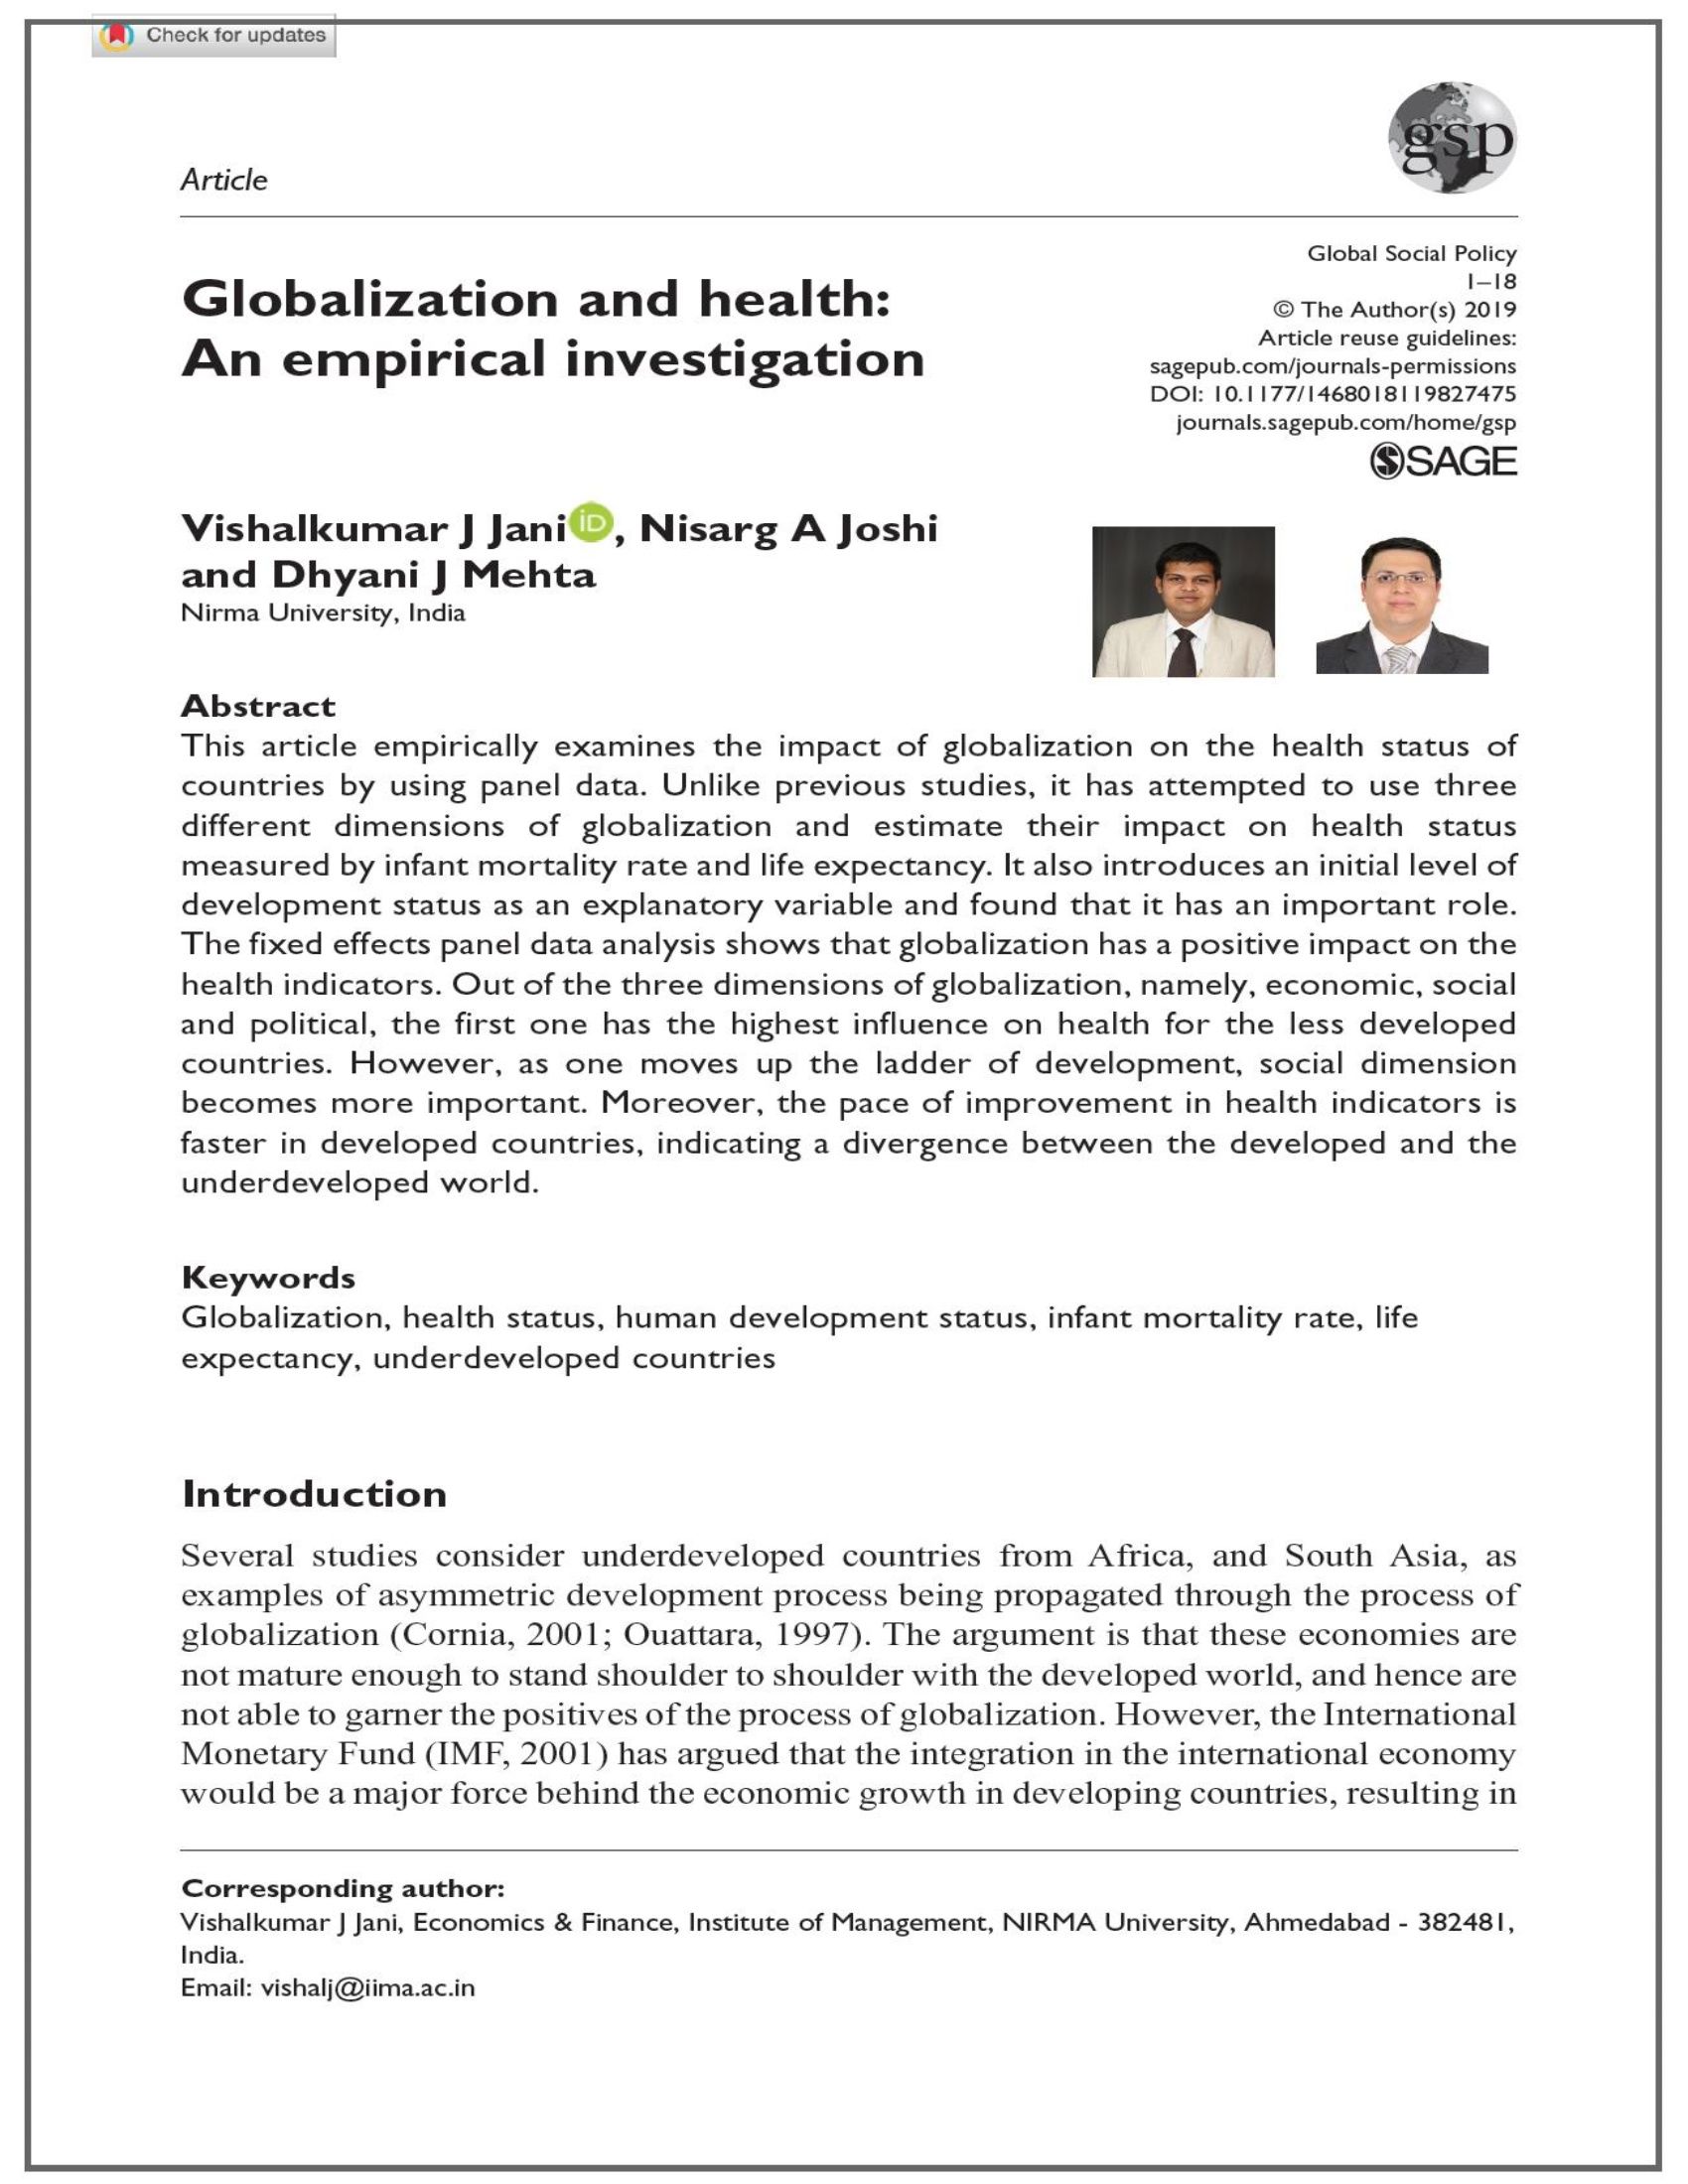 Globalization and health: An empirical investigation